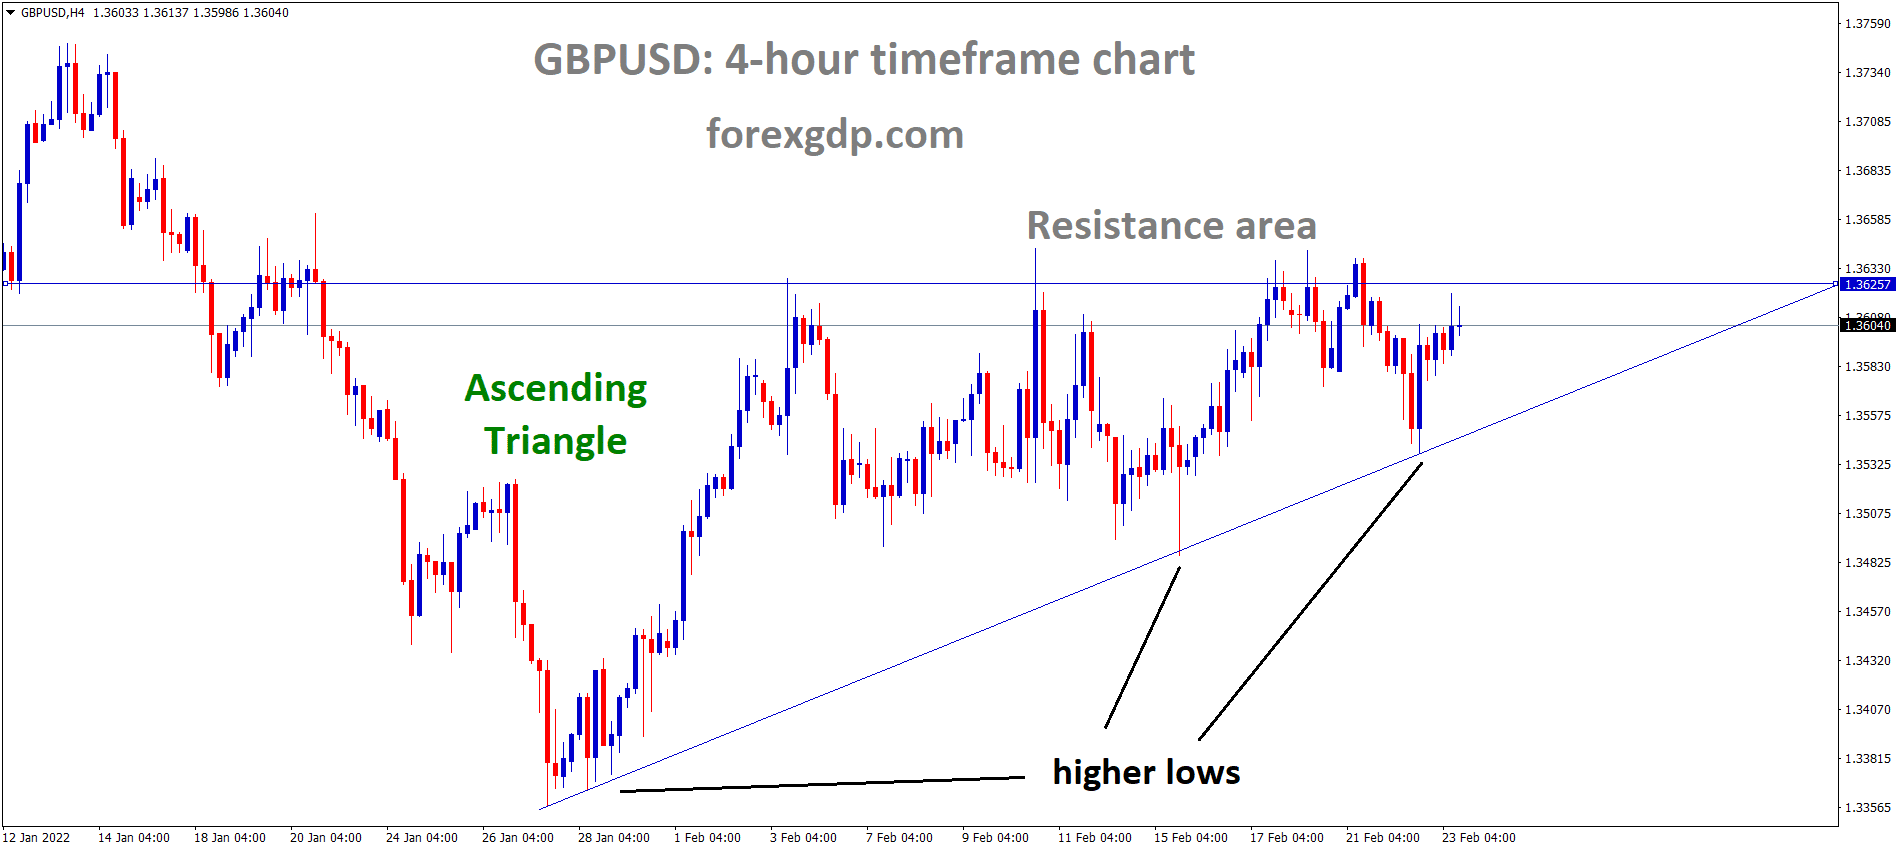 GBPUSD is moving in an ascending triangle pattern and the market has reached the resistance area of the pattern.